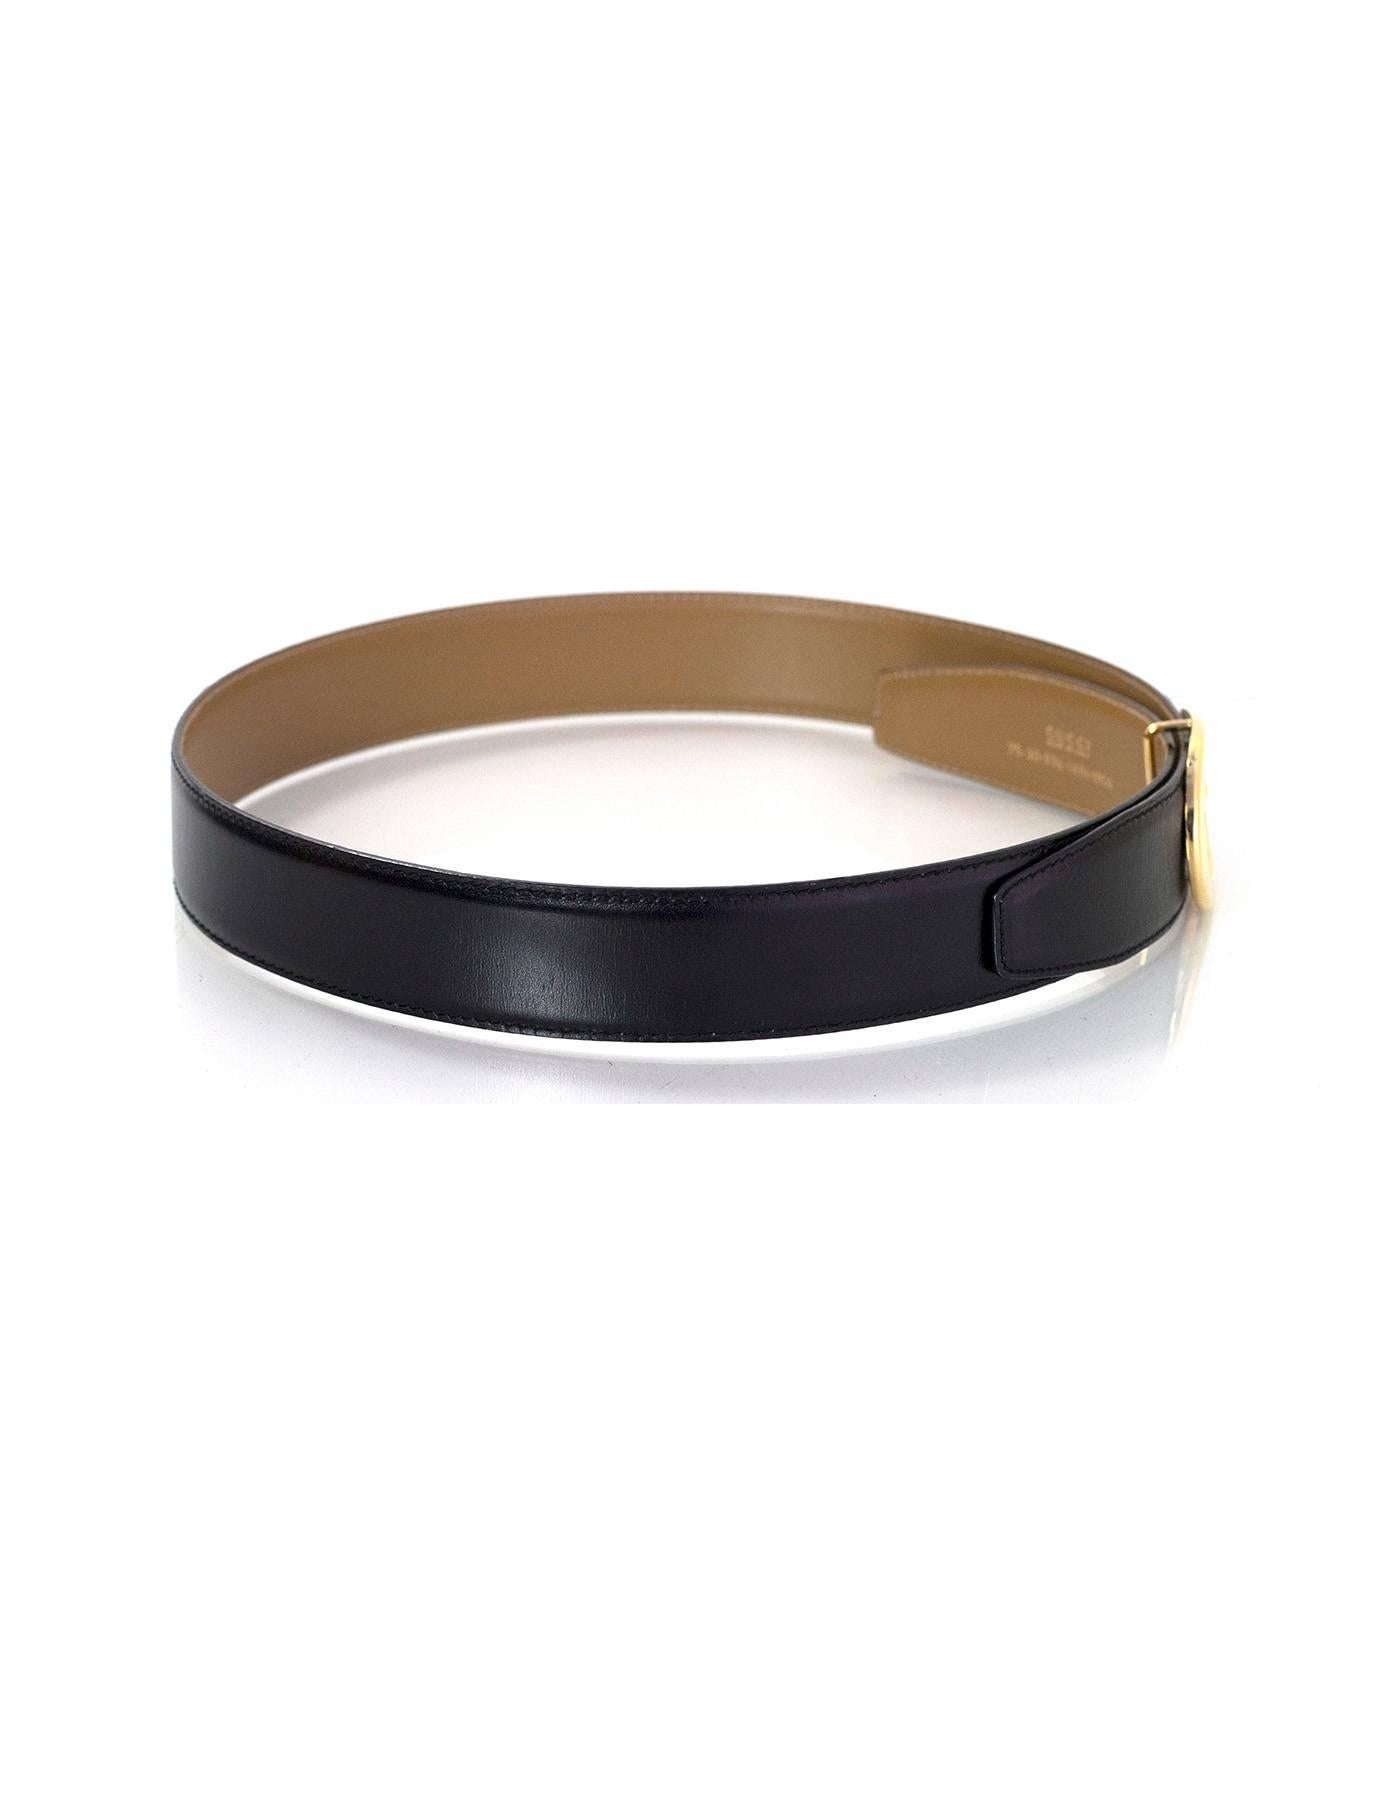 Gucci Black Leather Belt 
Features goldtone G buckle

Made In: Italy
Color: Black
Hardware: Goldtone
Materials: Leather
Closure/Opening: Stud and notch closure
Stamp: 75.30.036.1406.0956
Overall Condition: Excellent pre-owned condition with the